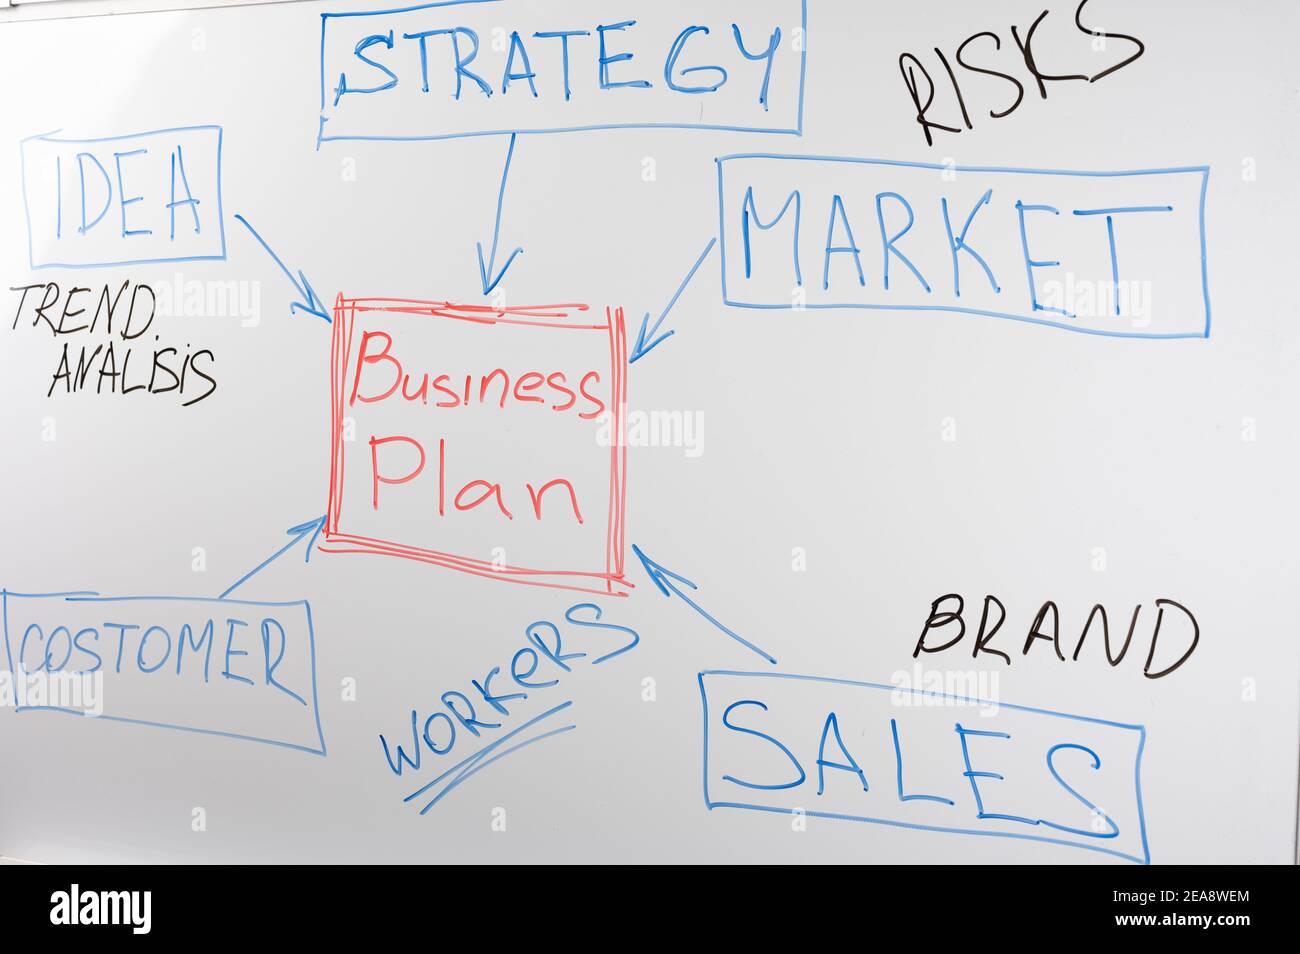 Business plan block diagram on whiteboard. business strategy concept. white marker board with drawn business plan elements. Stock Photo